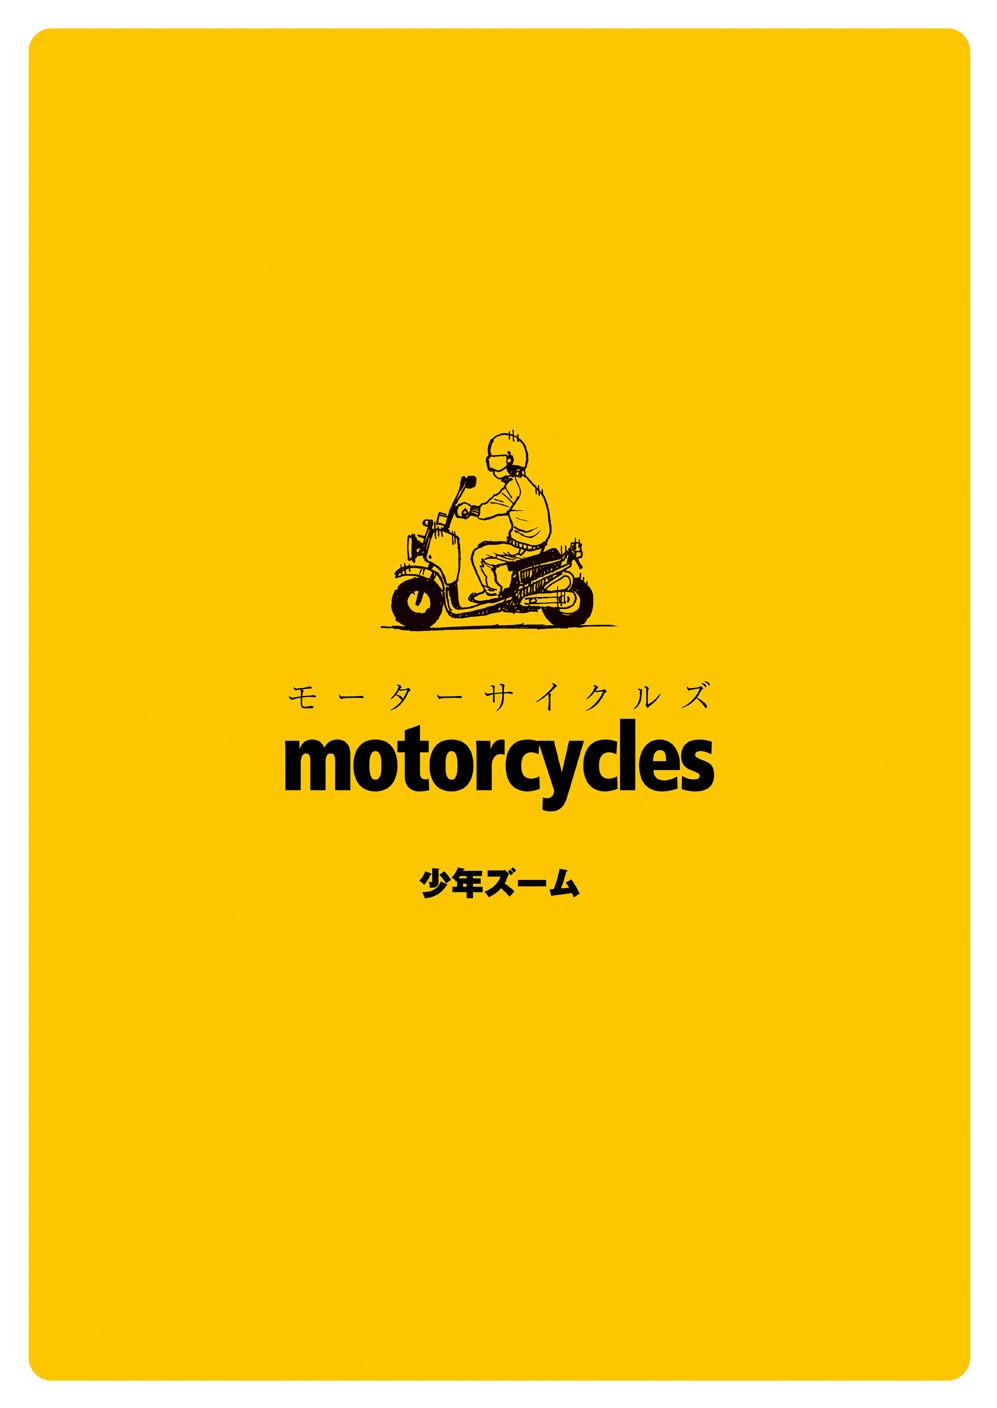 motorcycles 19